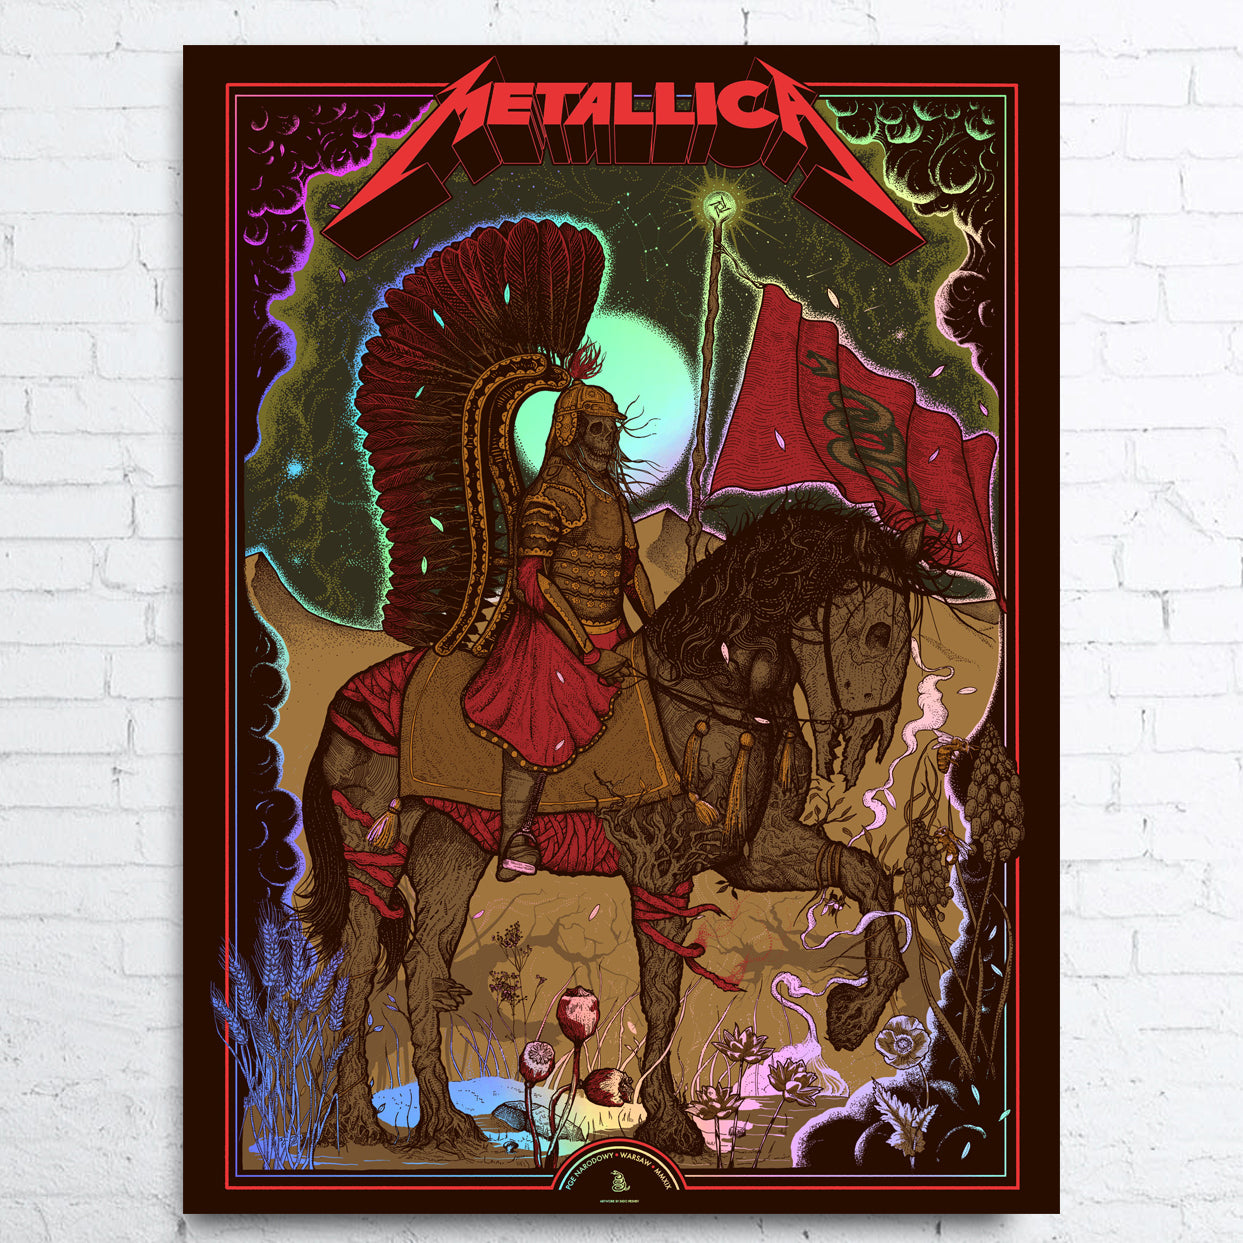 METALLICA RAINBOW FOIL Limited Edition Poster WARSAW 2019